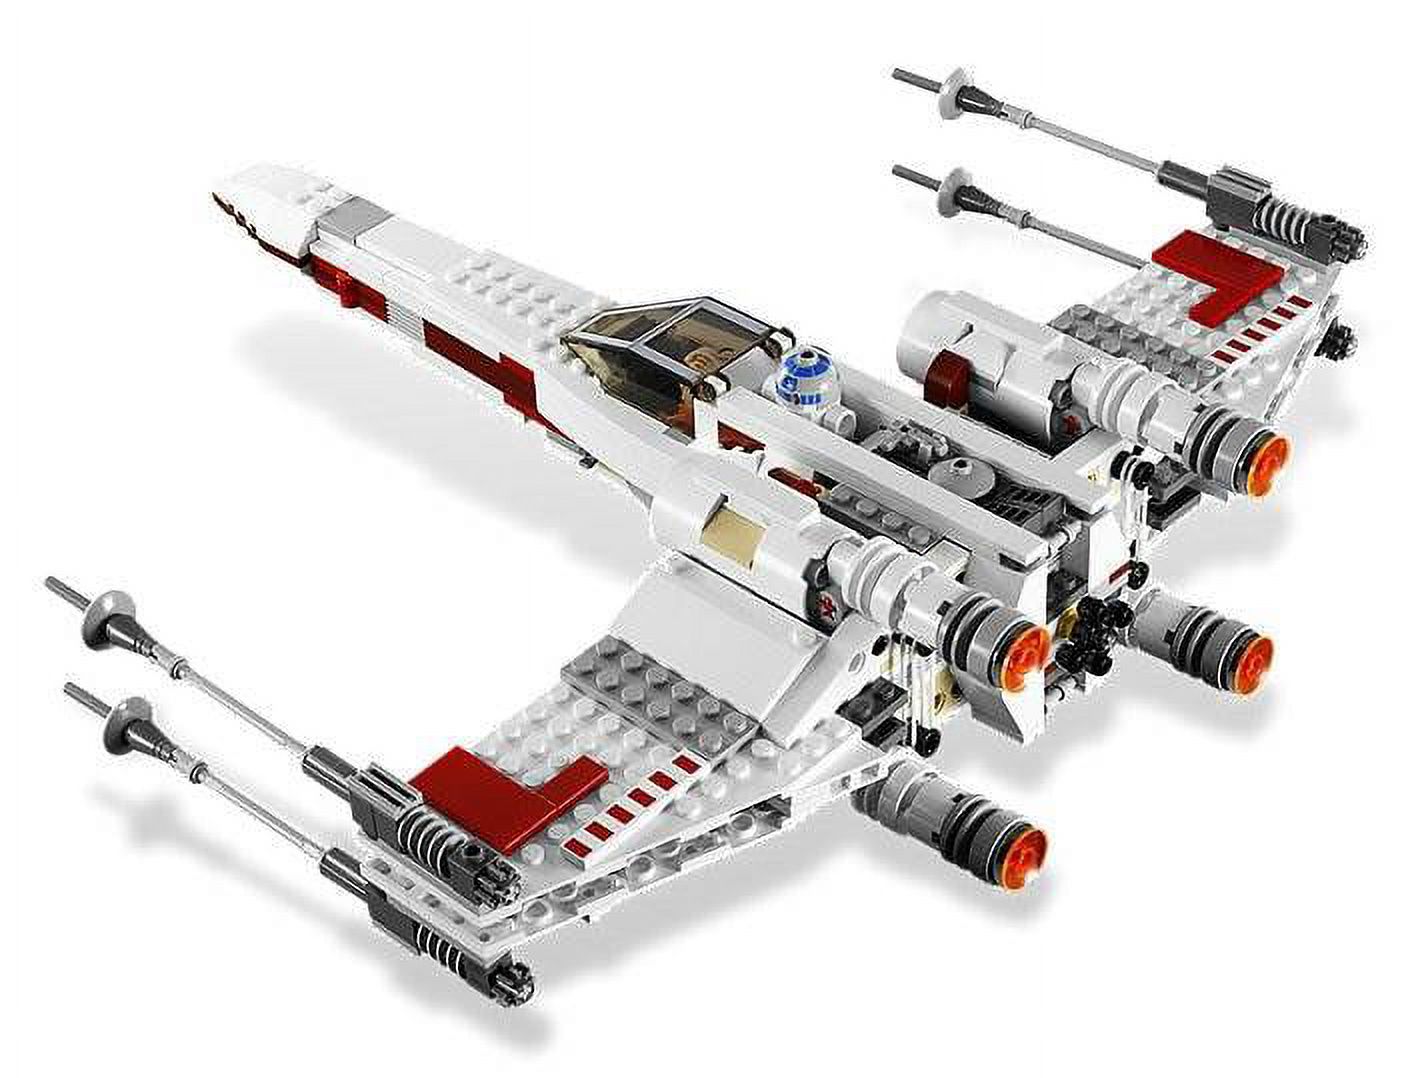 LEGO® Star Wars X-Wing Starfighter Spaceship with 4 Minifigures | 9493 - image 3 of 6